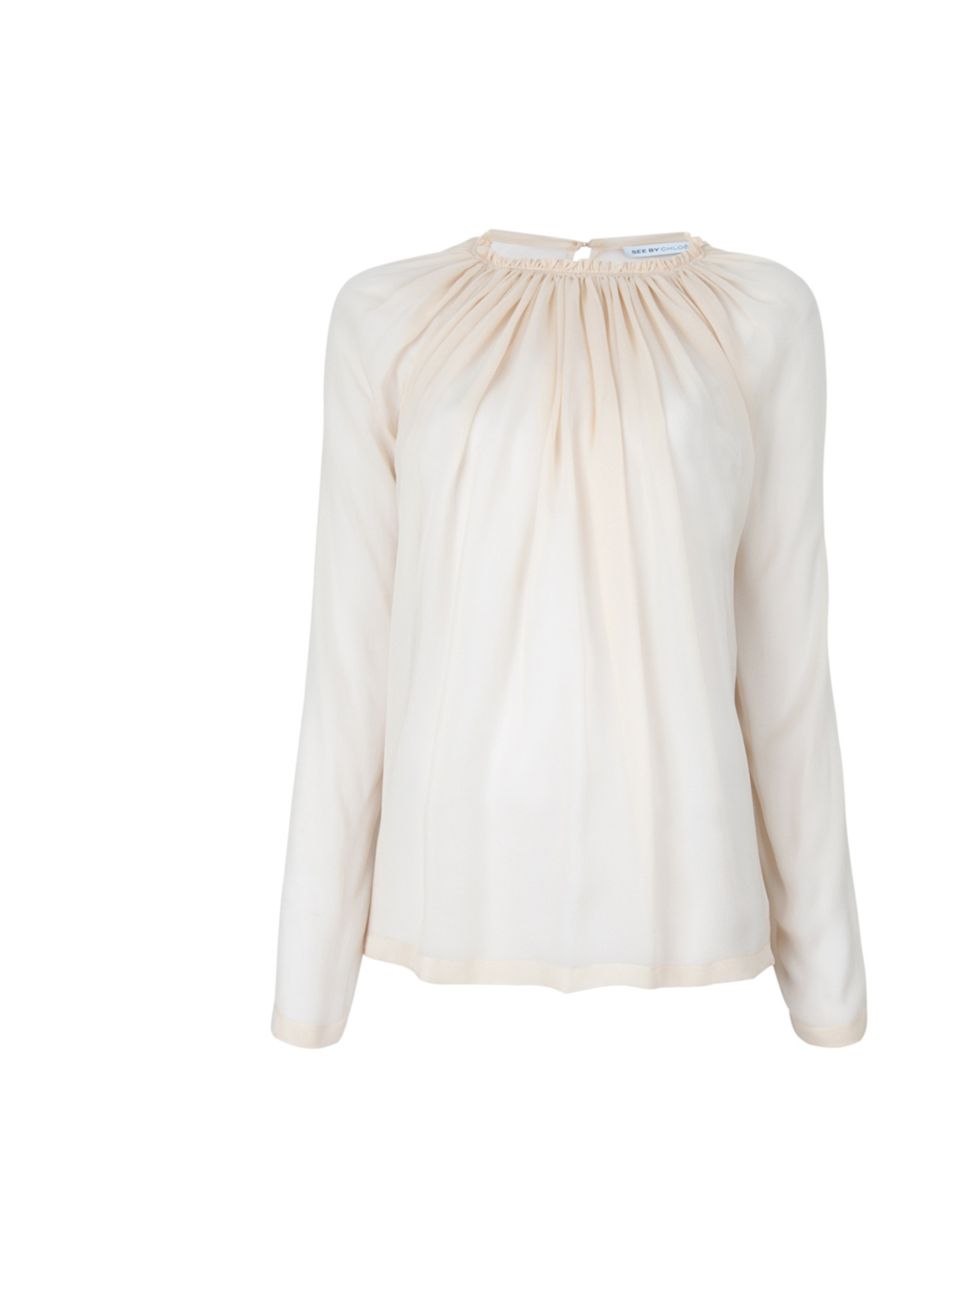 <p>Treat yourself to something feminine and effortlessly chic this winter. See by Chloe is our top pick See by Chloe nude silk blouse, £189.76, at <a href="http://www.farfetch.com/shopping/women/designer-see-by-chloe-ruffle-neck-blouse-item-10275644.aspx